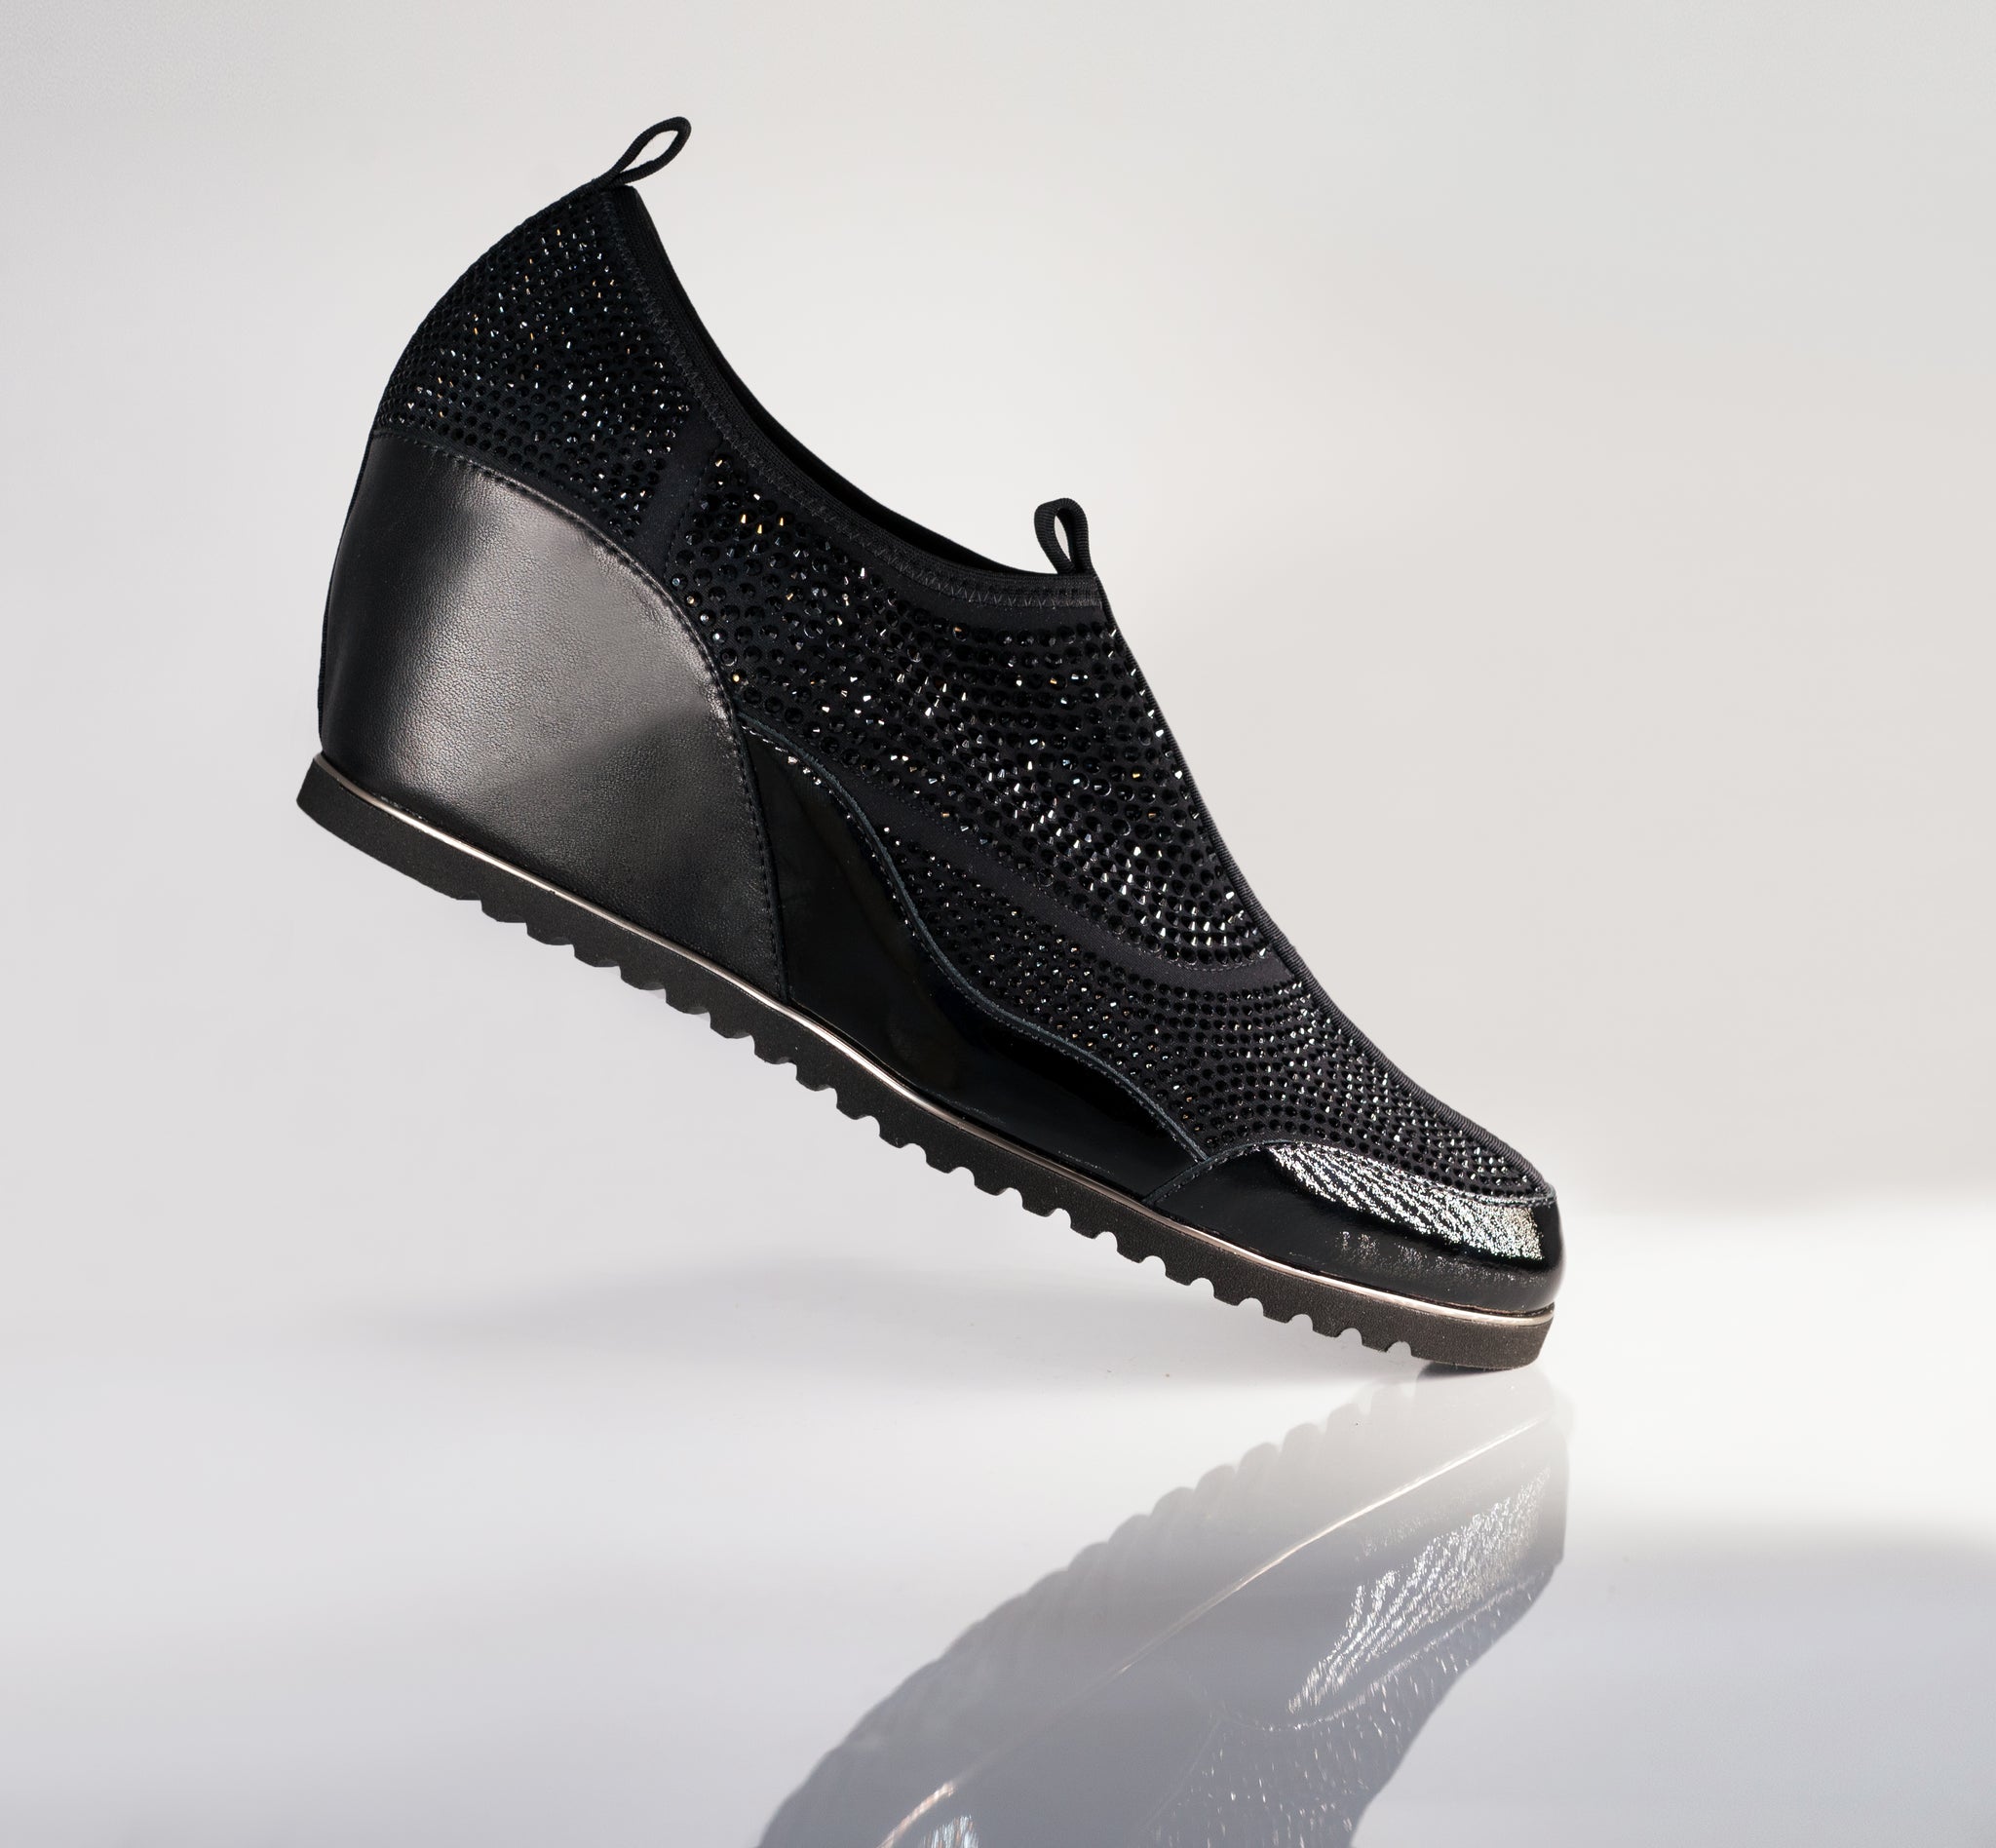 OMG Crystal Stretch, Hidden Wedge, Slip on Sneaker Black/Black - Passione di gina/ Made With Love In